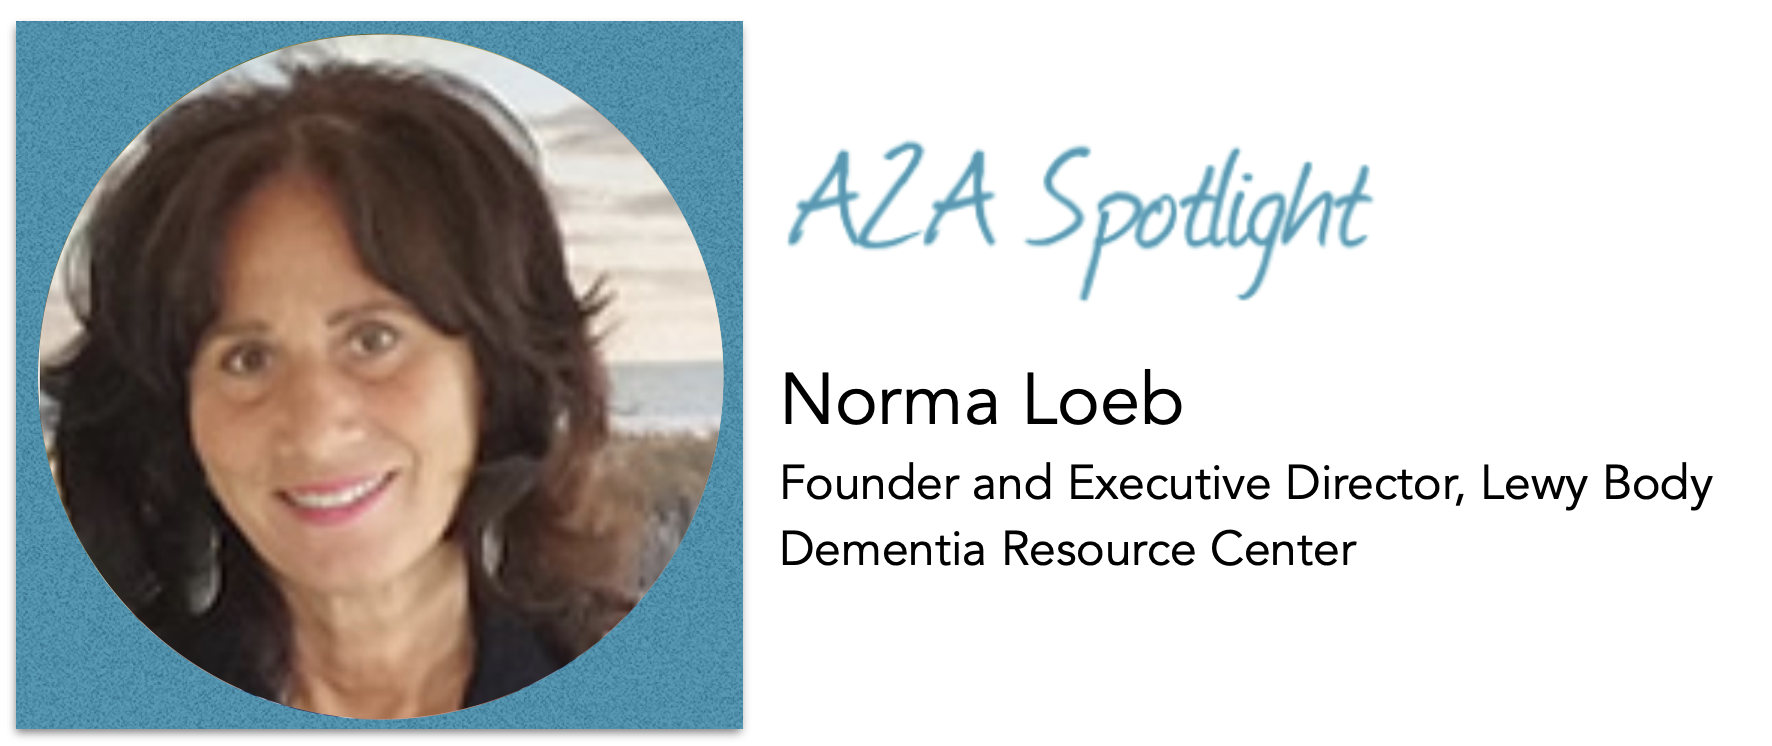 Spotlight – Norma Loeb Provides Resources and Support for People Living with LBD